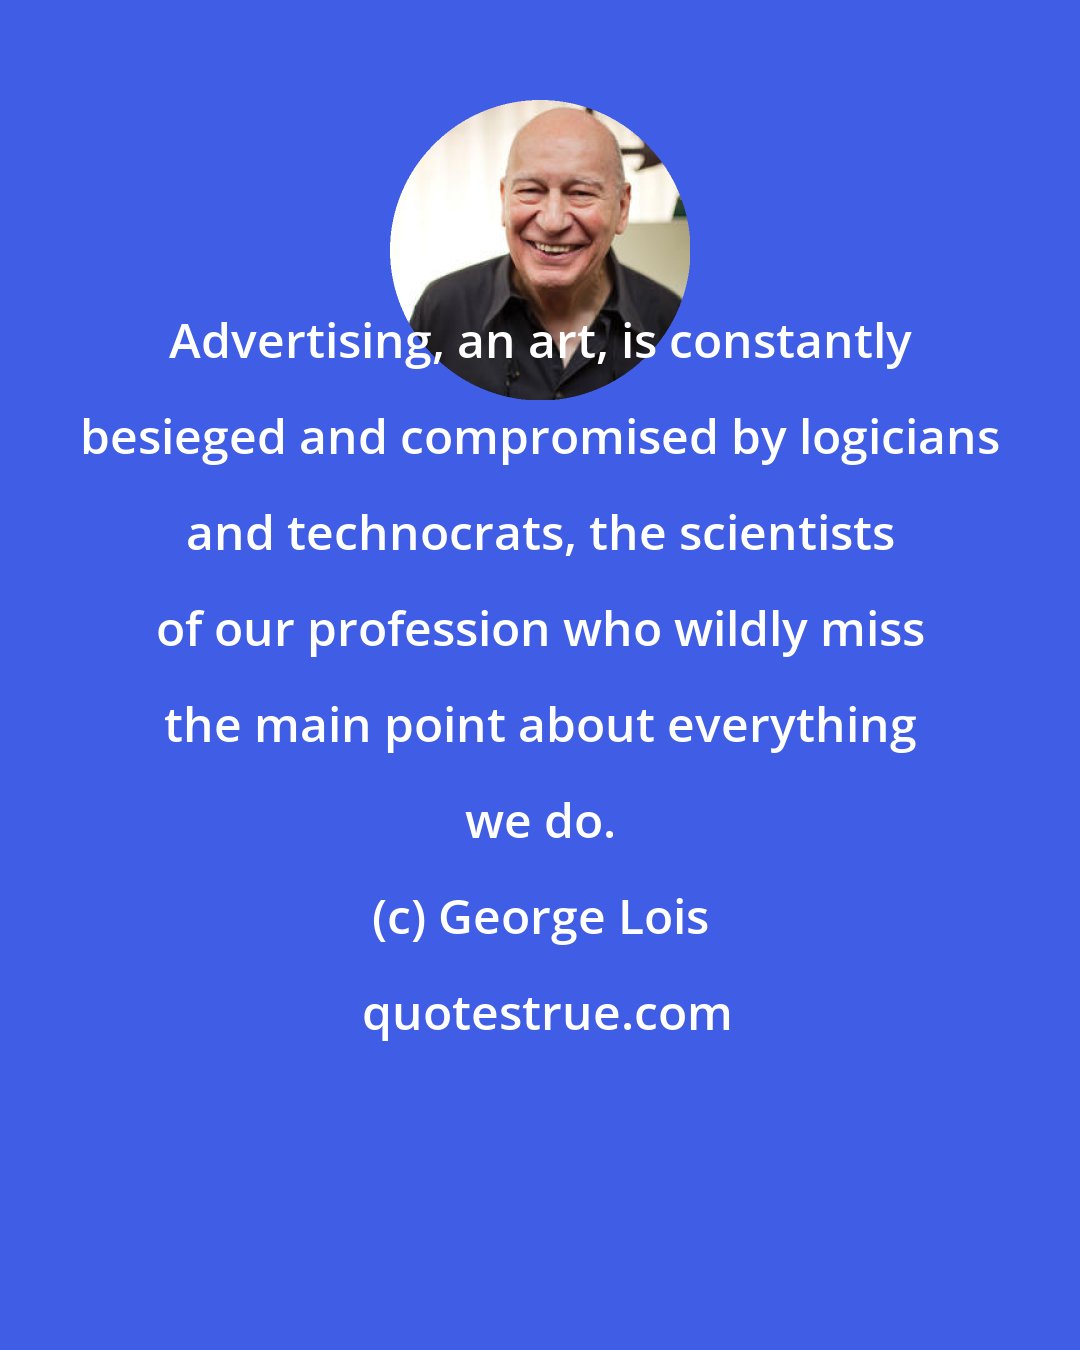 George Lois: Advertising, an art, is constantly besieged and compromised by logicians and technocrats, the scientists of our profession who wildly miss the main point about everything we do.